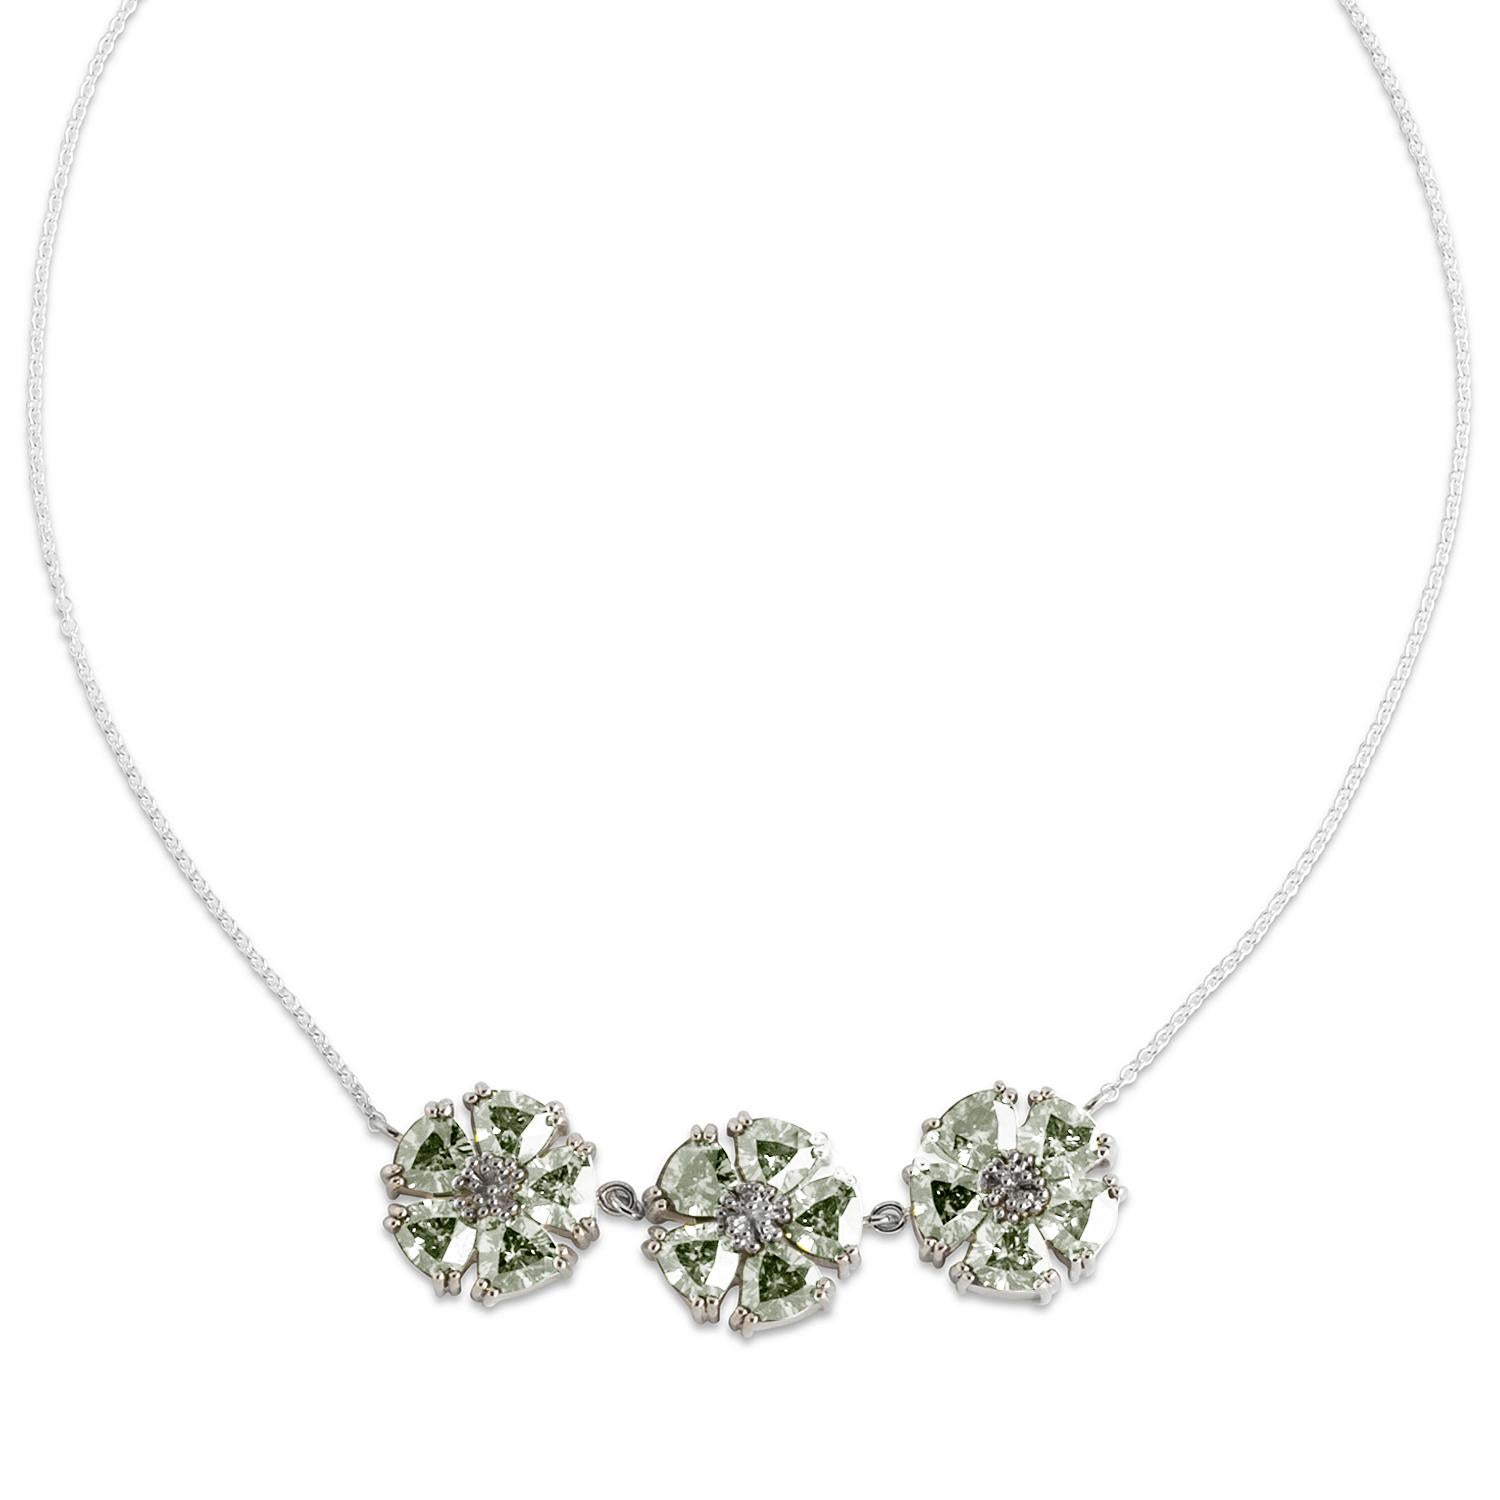 Designed in NYC

.925 Sterling Silver 15 x 7 mm Olive Peridot 123 Blossom Stone Necklace. No matter the season, allow natural beauty to surround you wherever you go.  123 blossom stone necklace: 

Sterling silver 
High-polish finish
Medium-weight